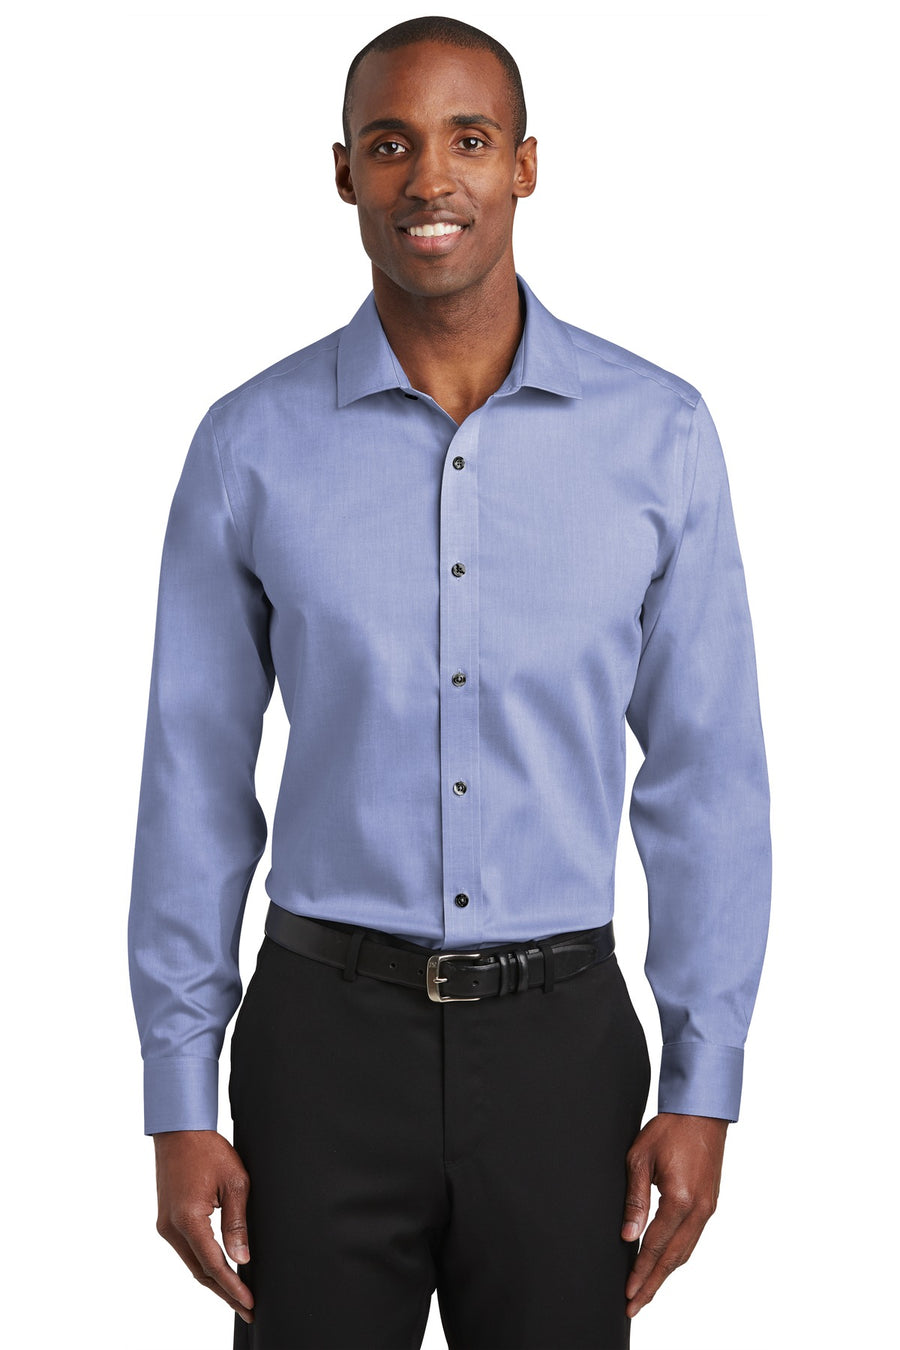 Red House Slim Fit Pinpoint Oxford Non-Iron Shirt.